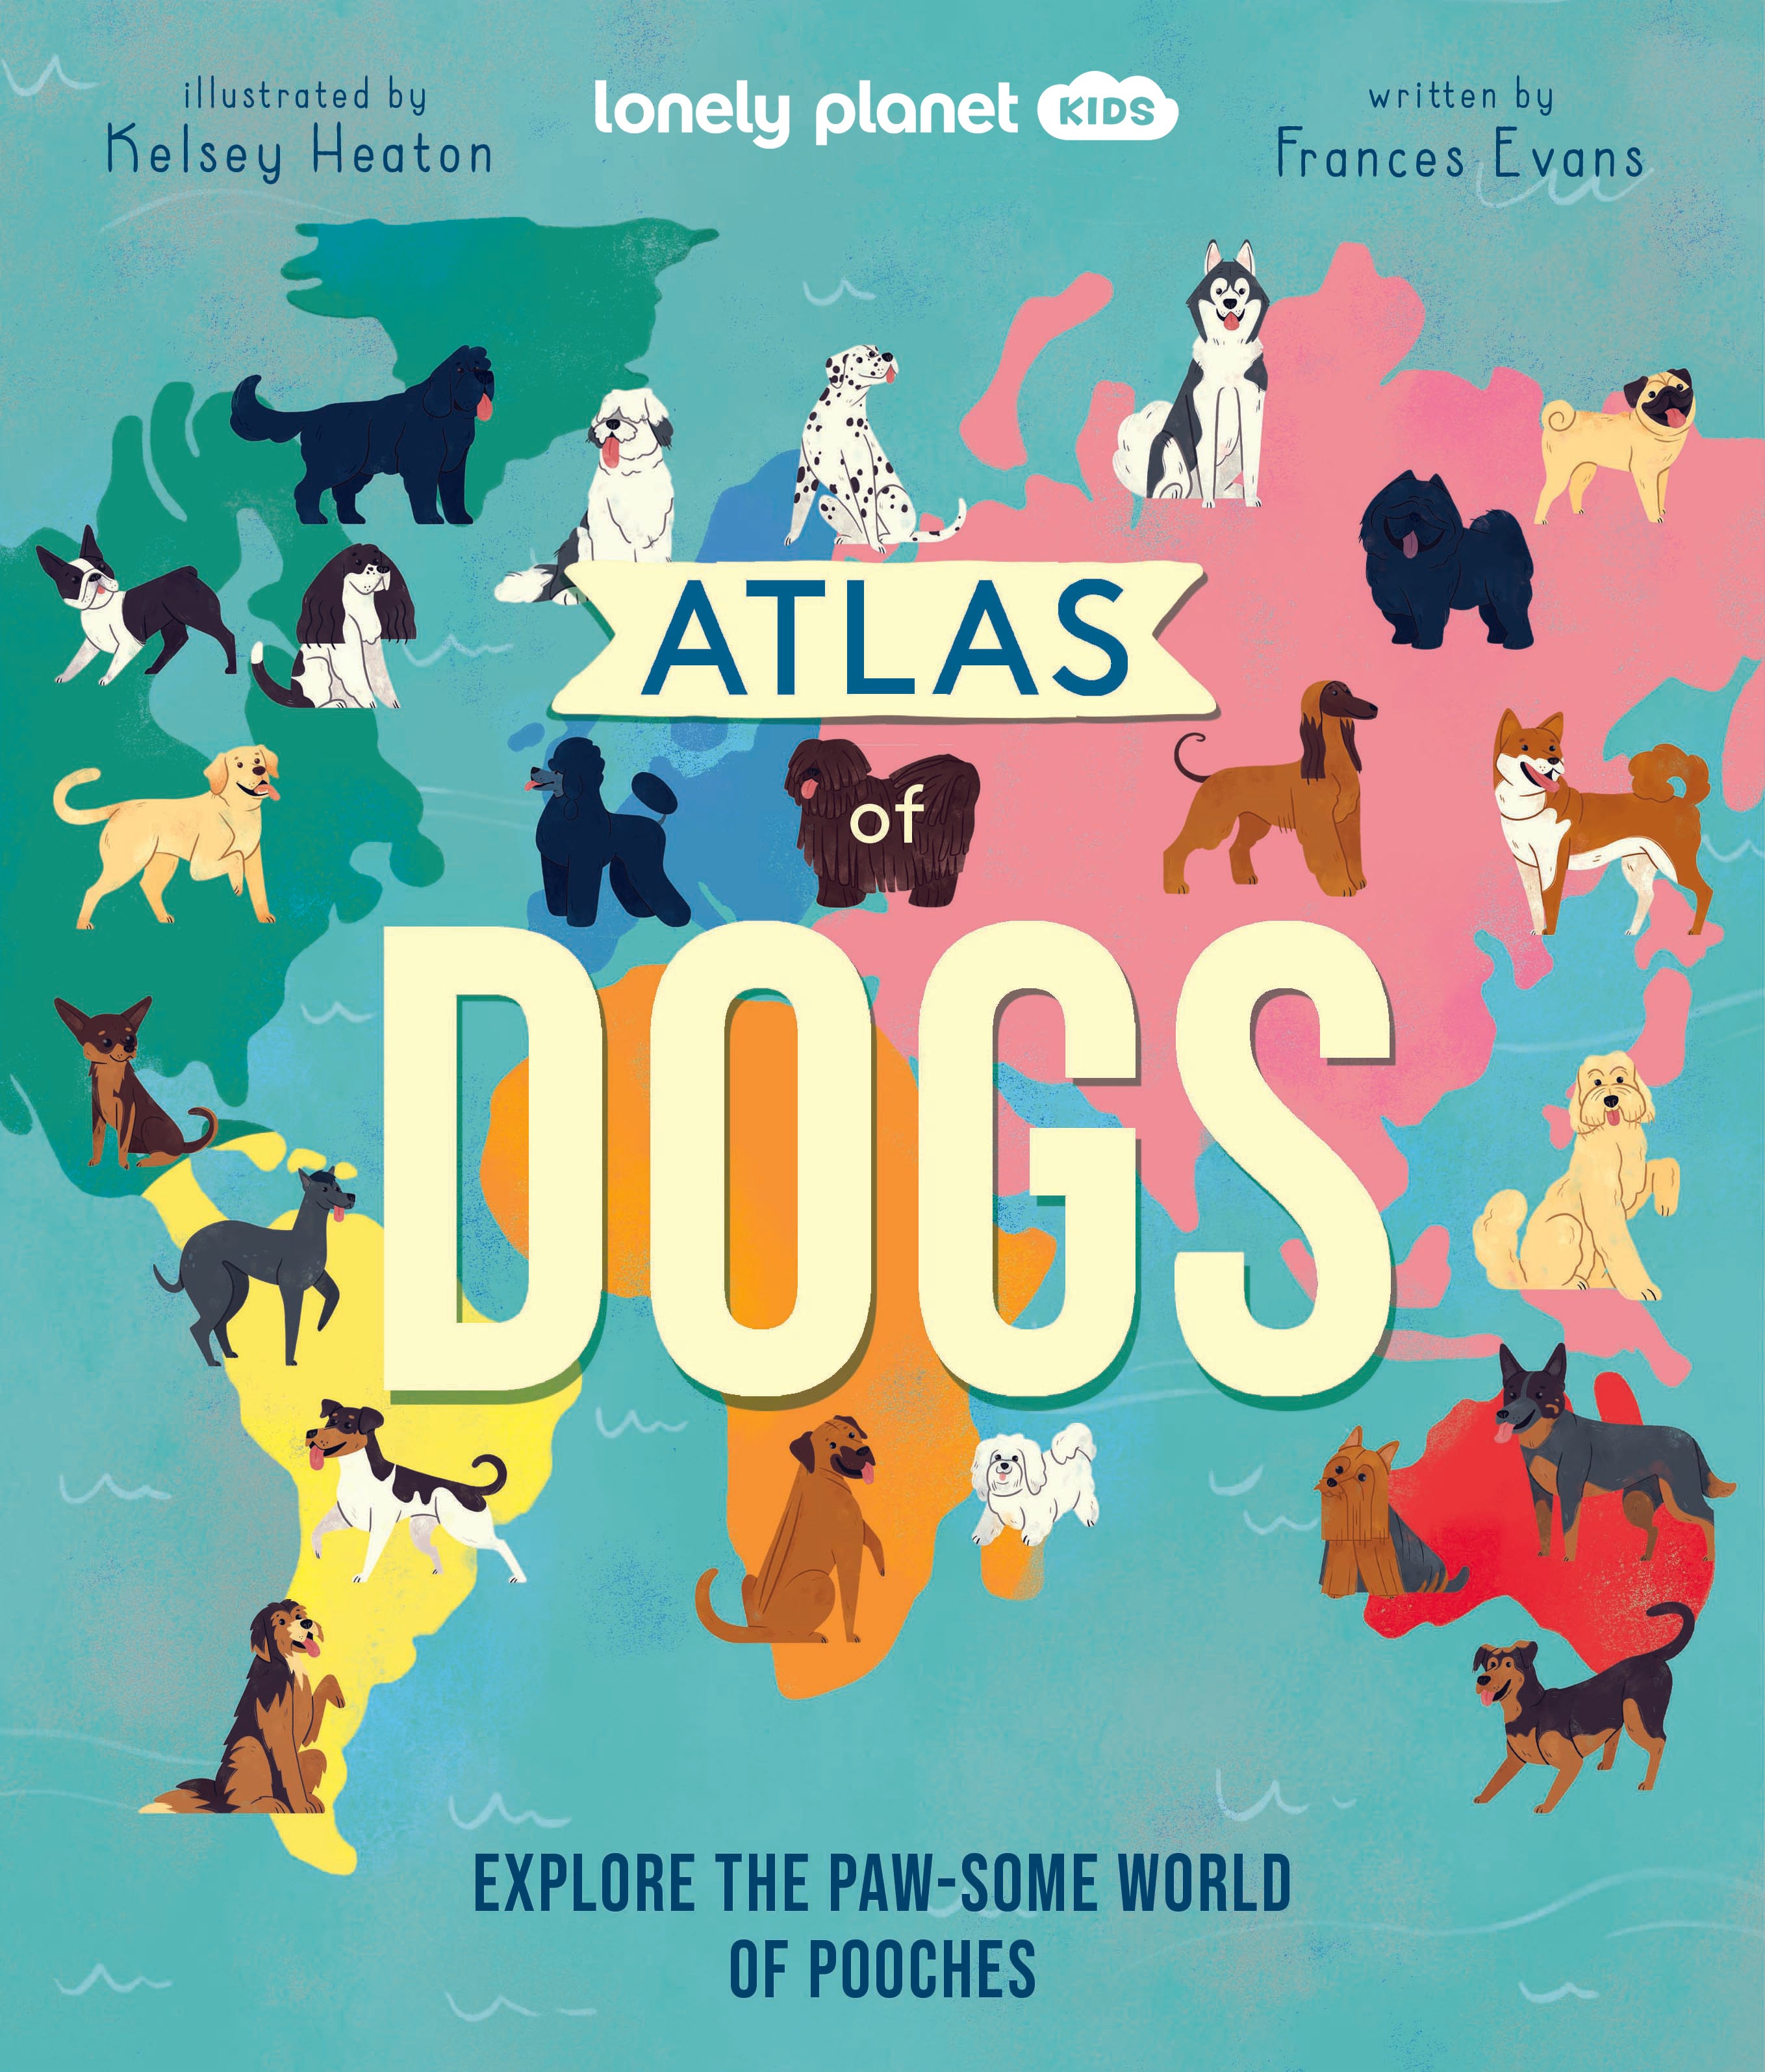 Atlas　(North　Dogs　of　edition)　South　America